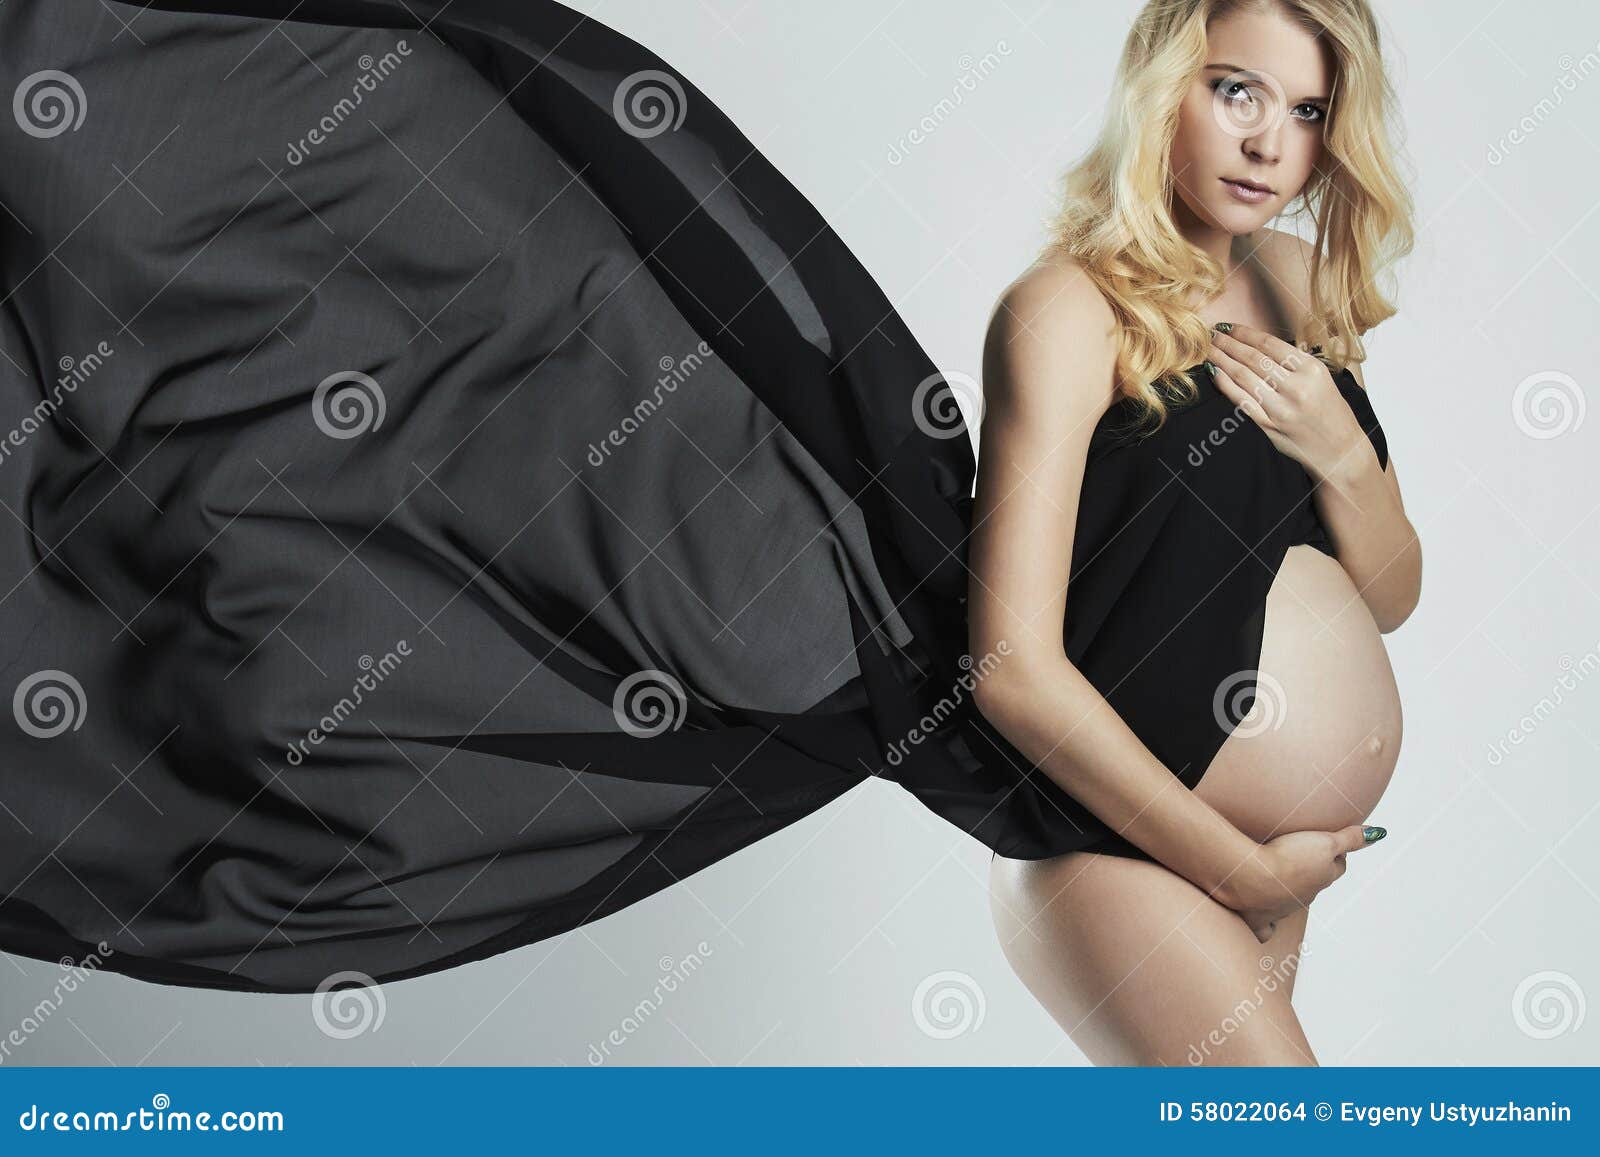 young-beautiful-pregnant-woman-flying-fabric-glamour-style-art-fashion-portrait-blonde-girl-big-belly-58022064